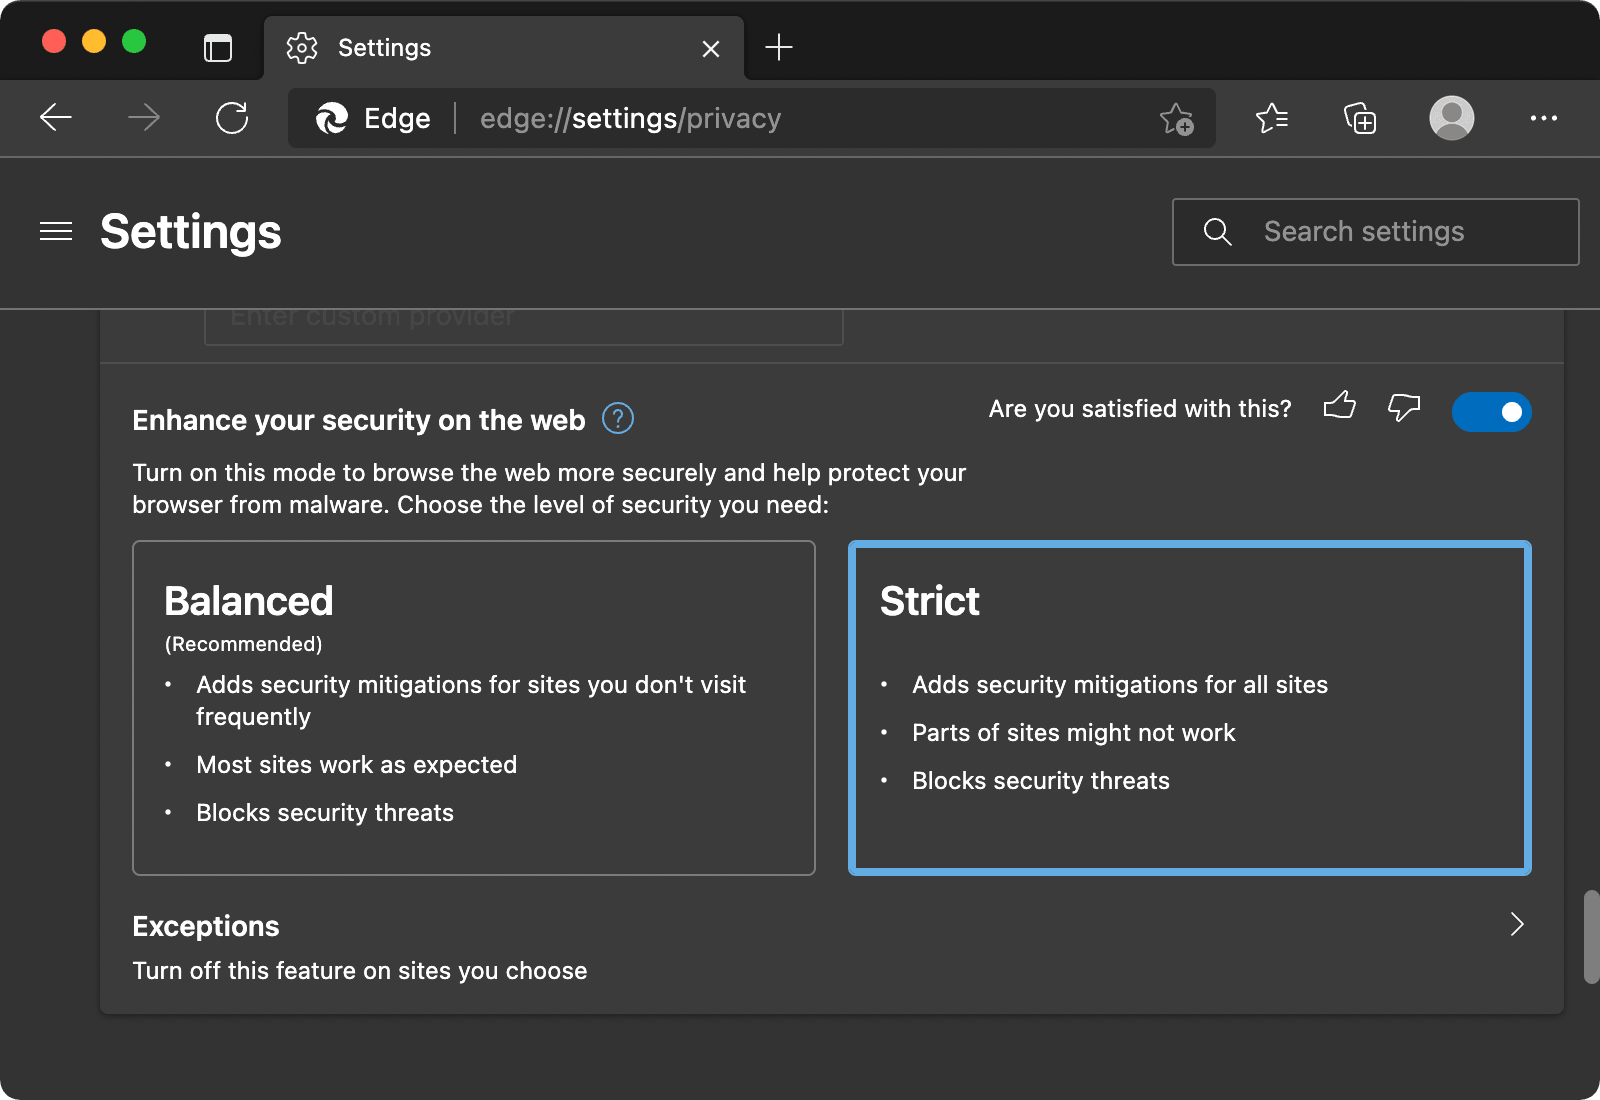 Edge privacy settings showing the “Enhance your security on the web” section.